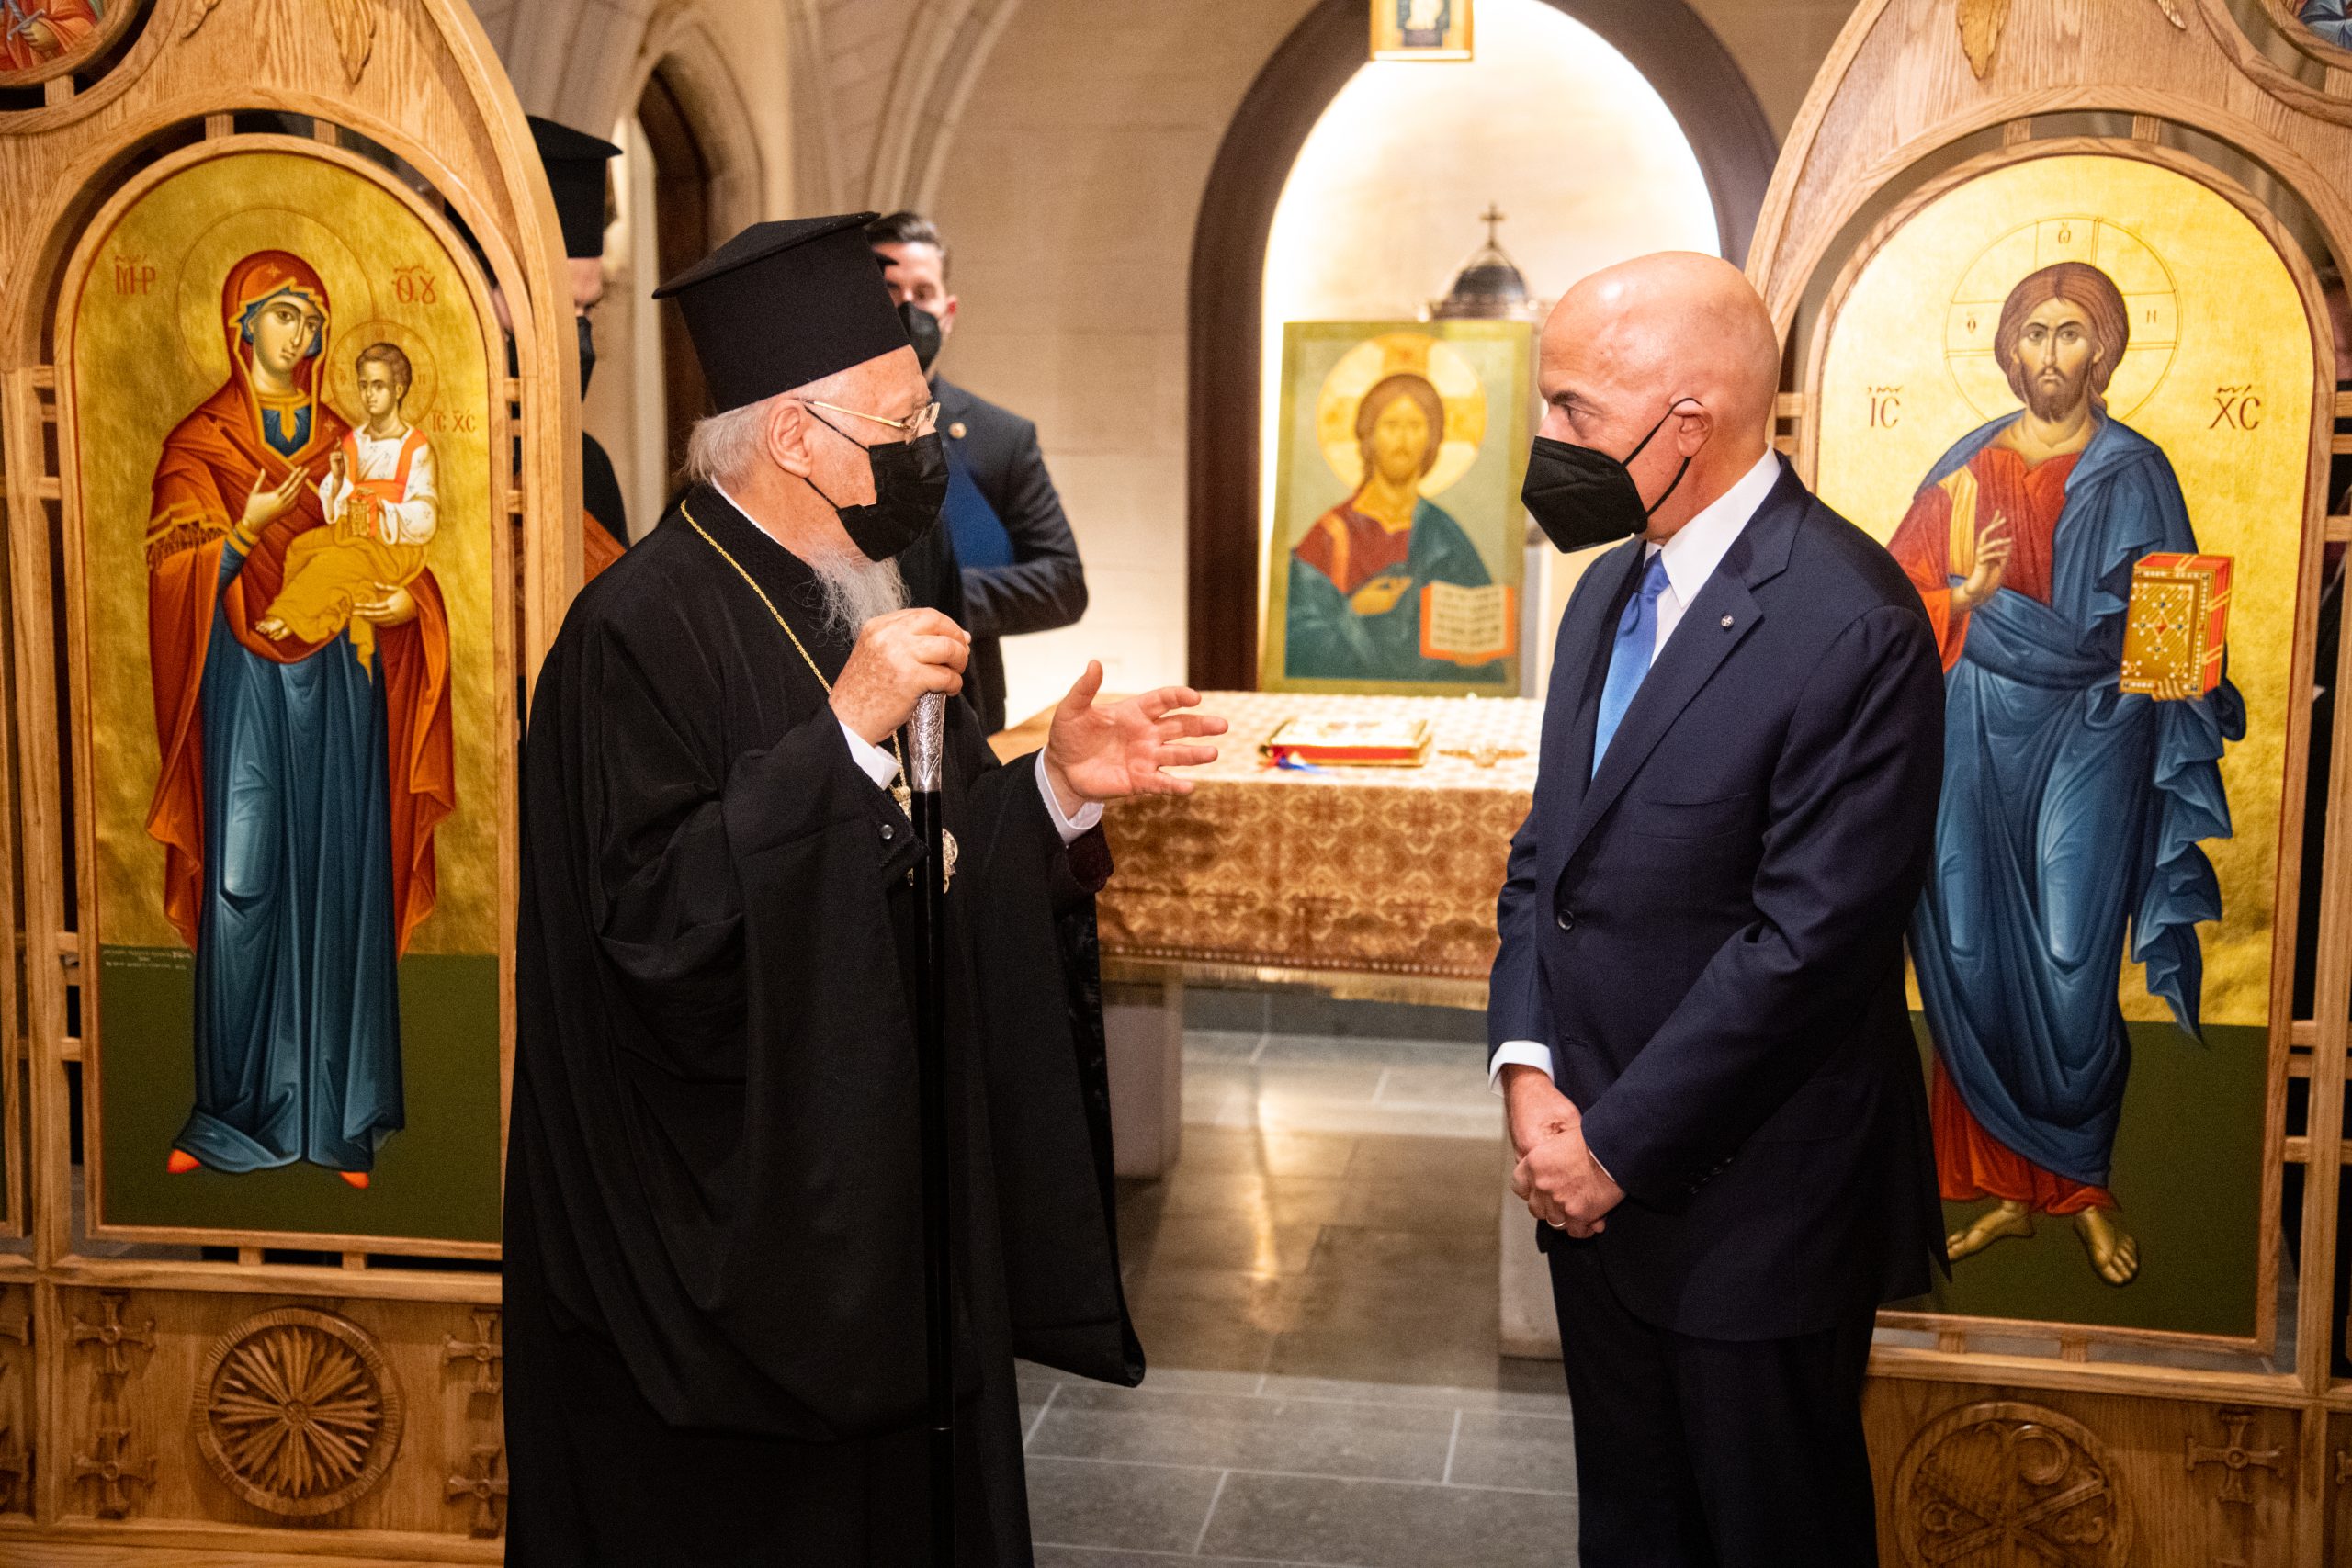 The Ecumenical Patriarch greets Michael Psaros (B’89), a member of Georgetown’s Board of Directors.